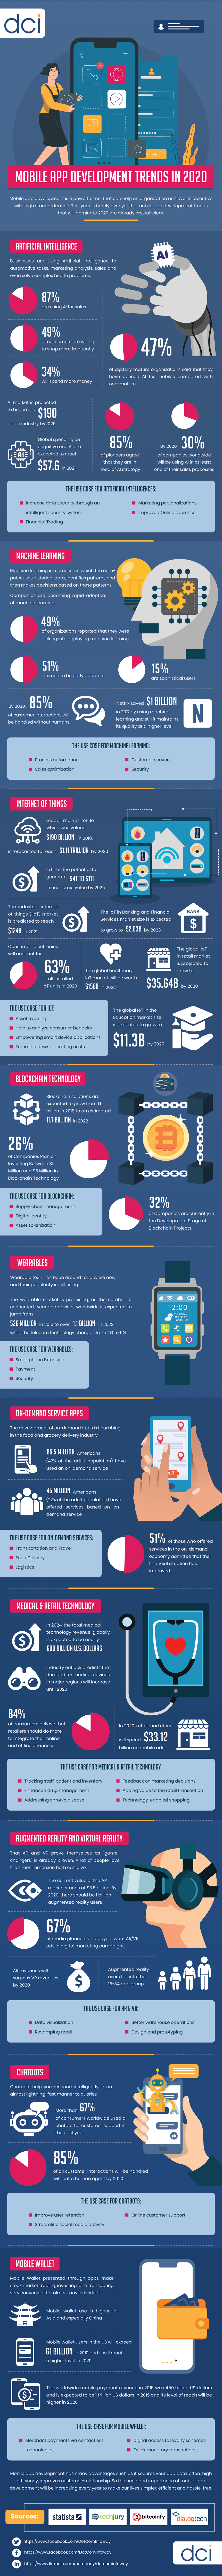 Mobile App Trends 2020 - Infographic